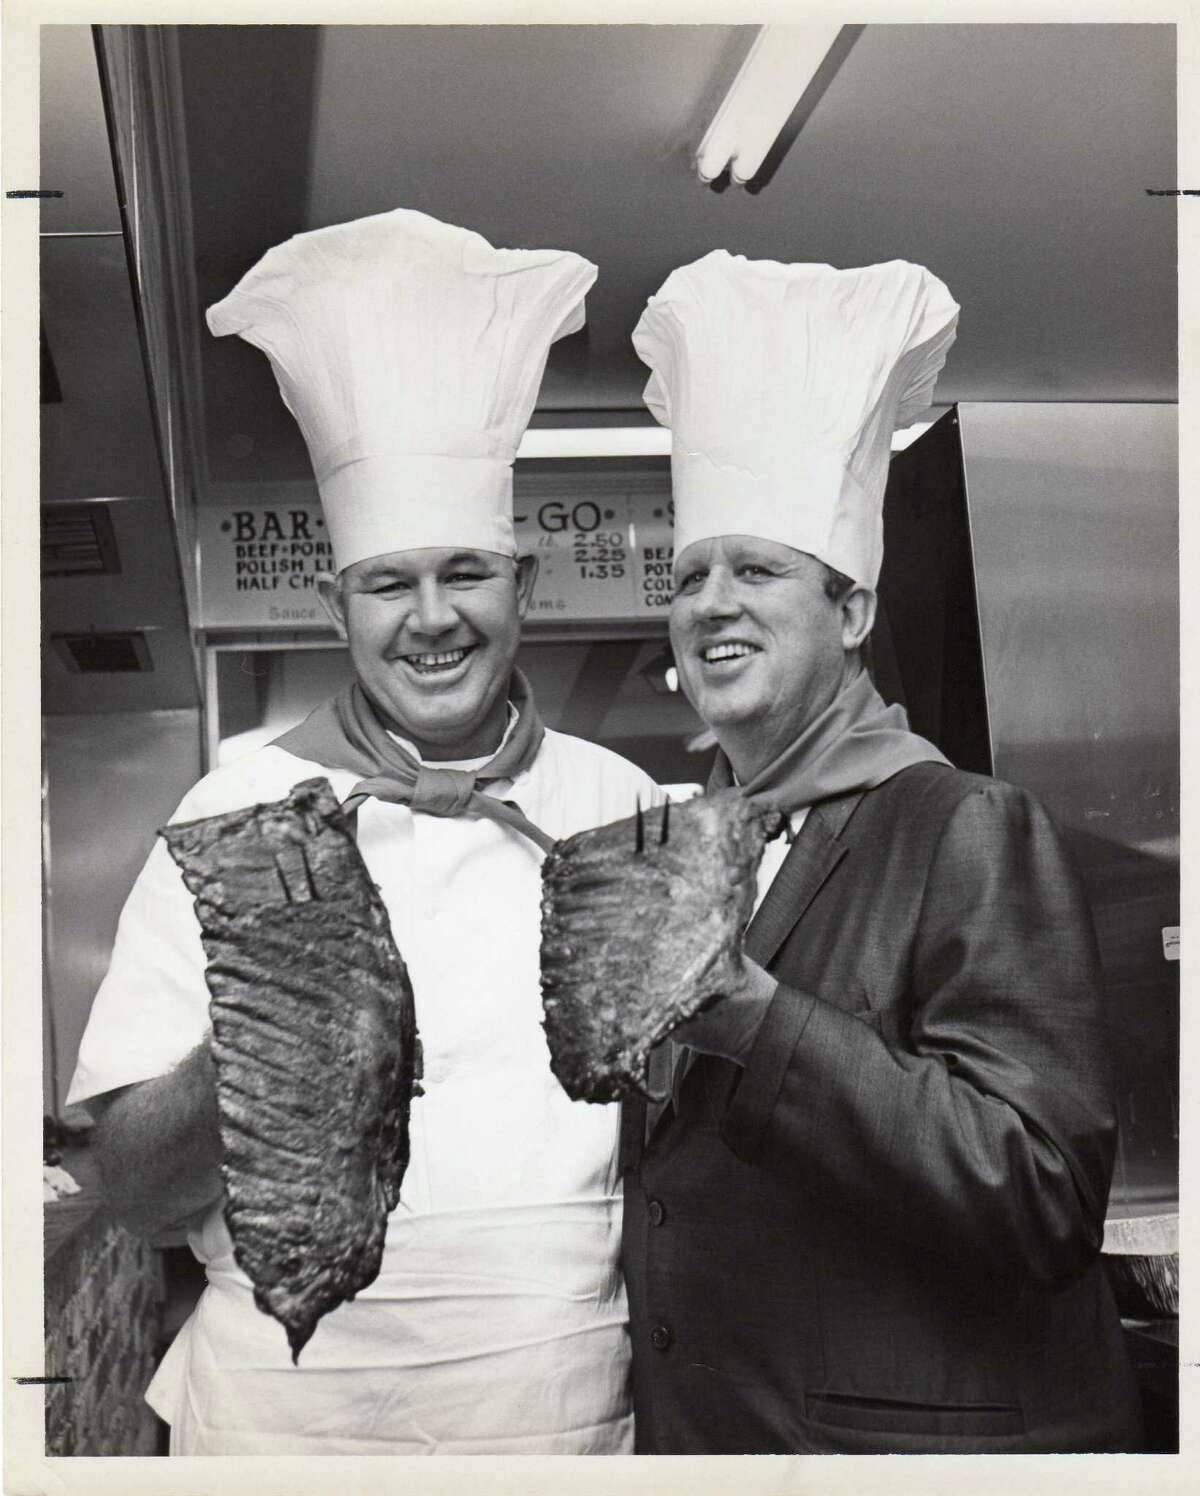 Above, Leonard McNeill at a Lenox Bar-B-Q catering job during the 1970s. Left, Leonard McNeill, left, and Lloyd Smallwood at the Longhorn Barbecue on Gessner, circa mid-1960s.